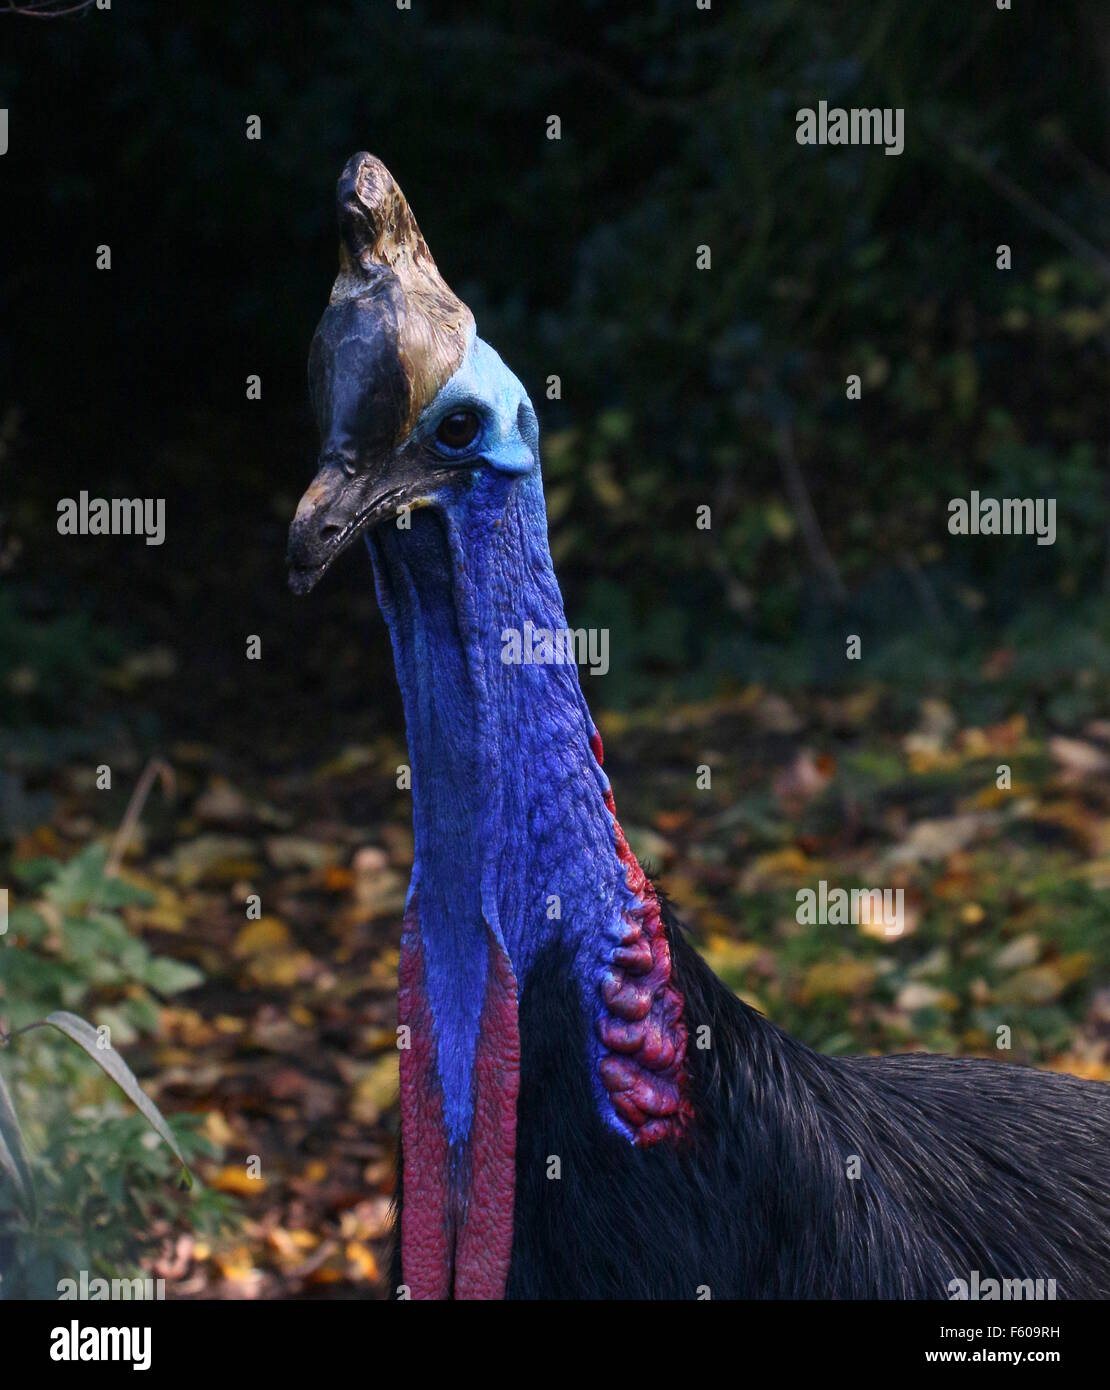 Australian Southern cassowary (Casuarius casuarius) a.k.a. double wattled or two wattled cassowary, close-up of head and wattles Stock Photo